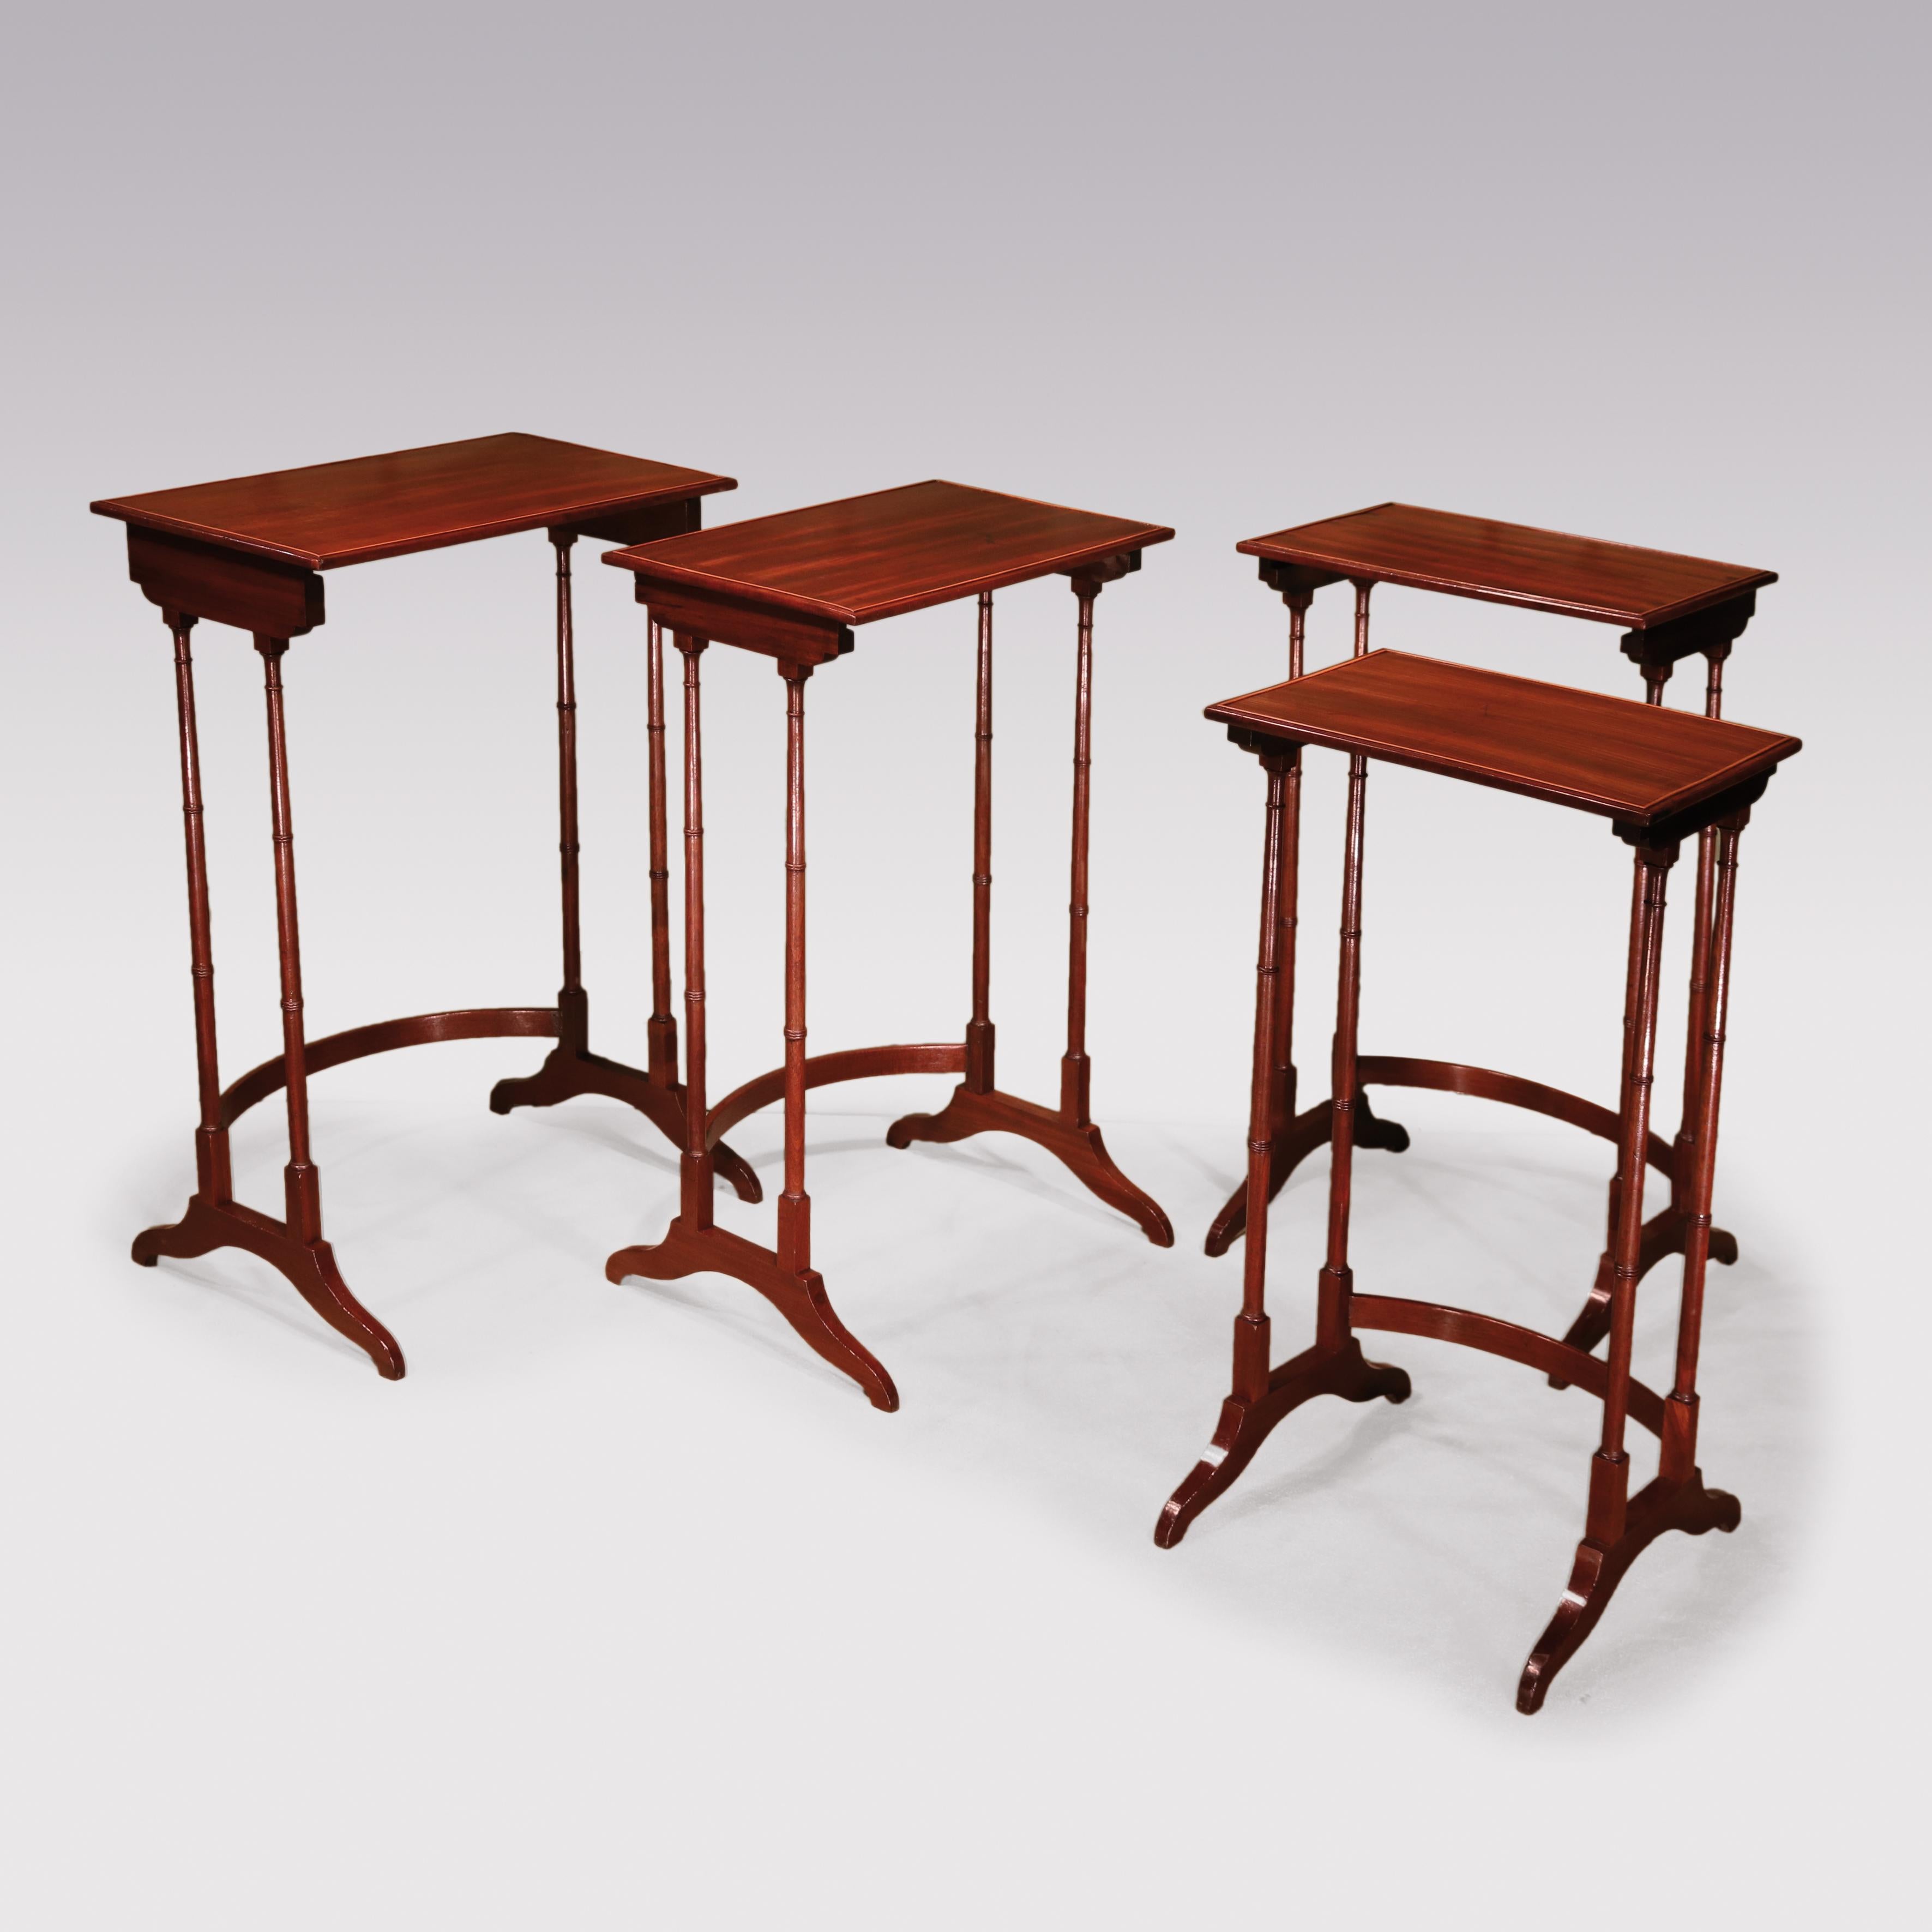 A set of 4 Regency period mahogany Quartetto Tables, having boxwood beaded rectangular tops supported on slender ring-turned legs ending on splay feet with concave stretchers.